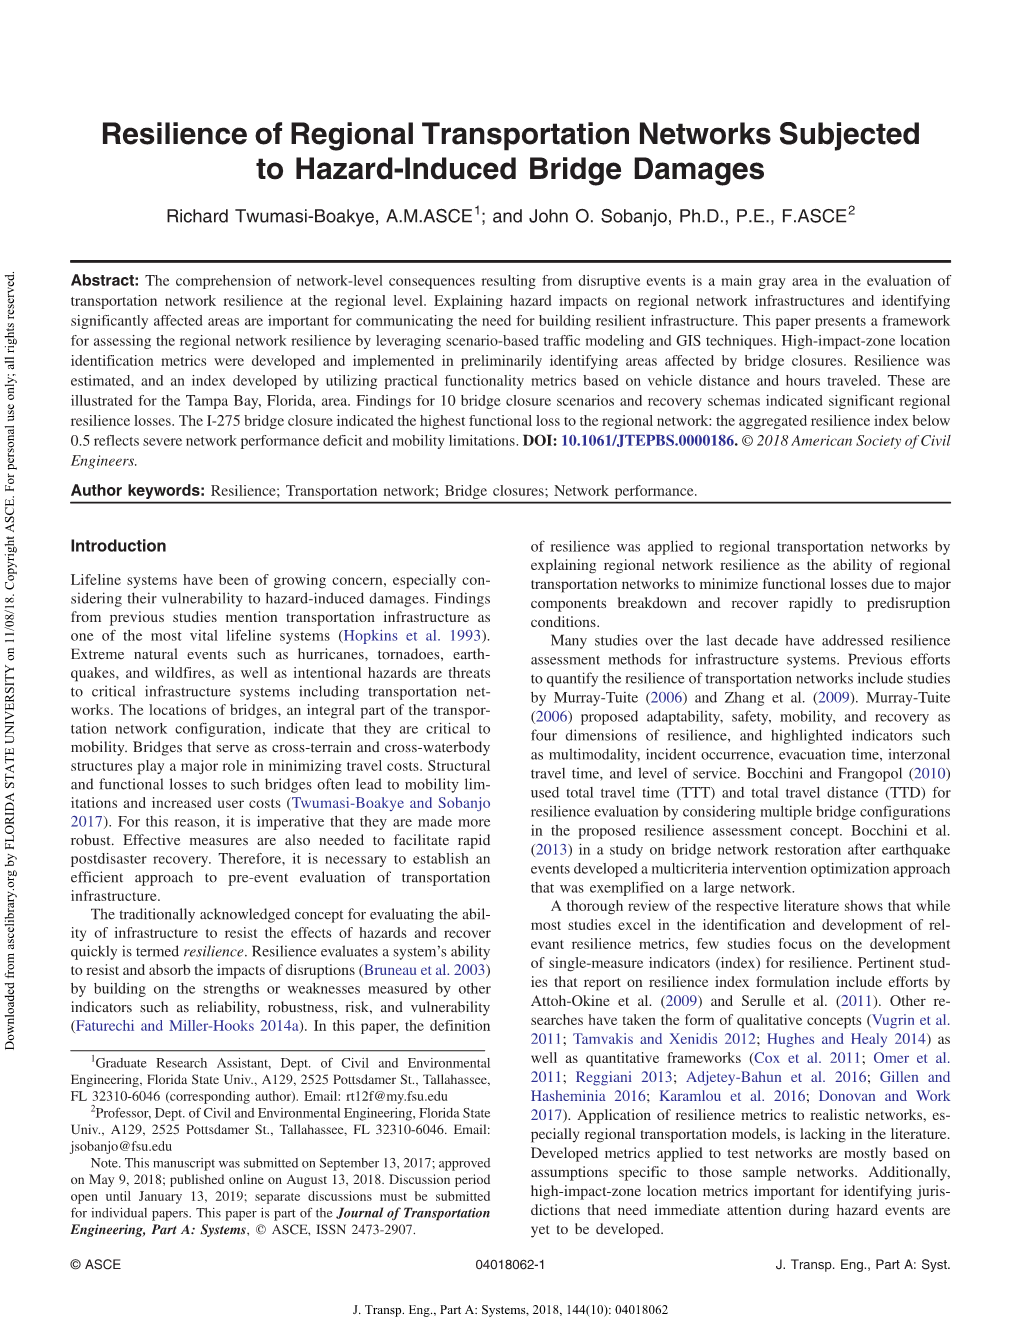 Resilience of Regional Transportation Networks Subjected to Hazard-Induced Bridge Damages